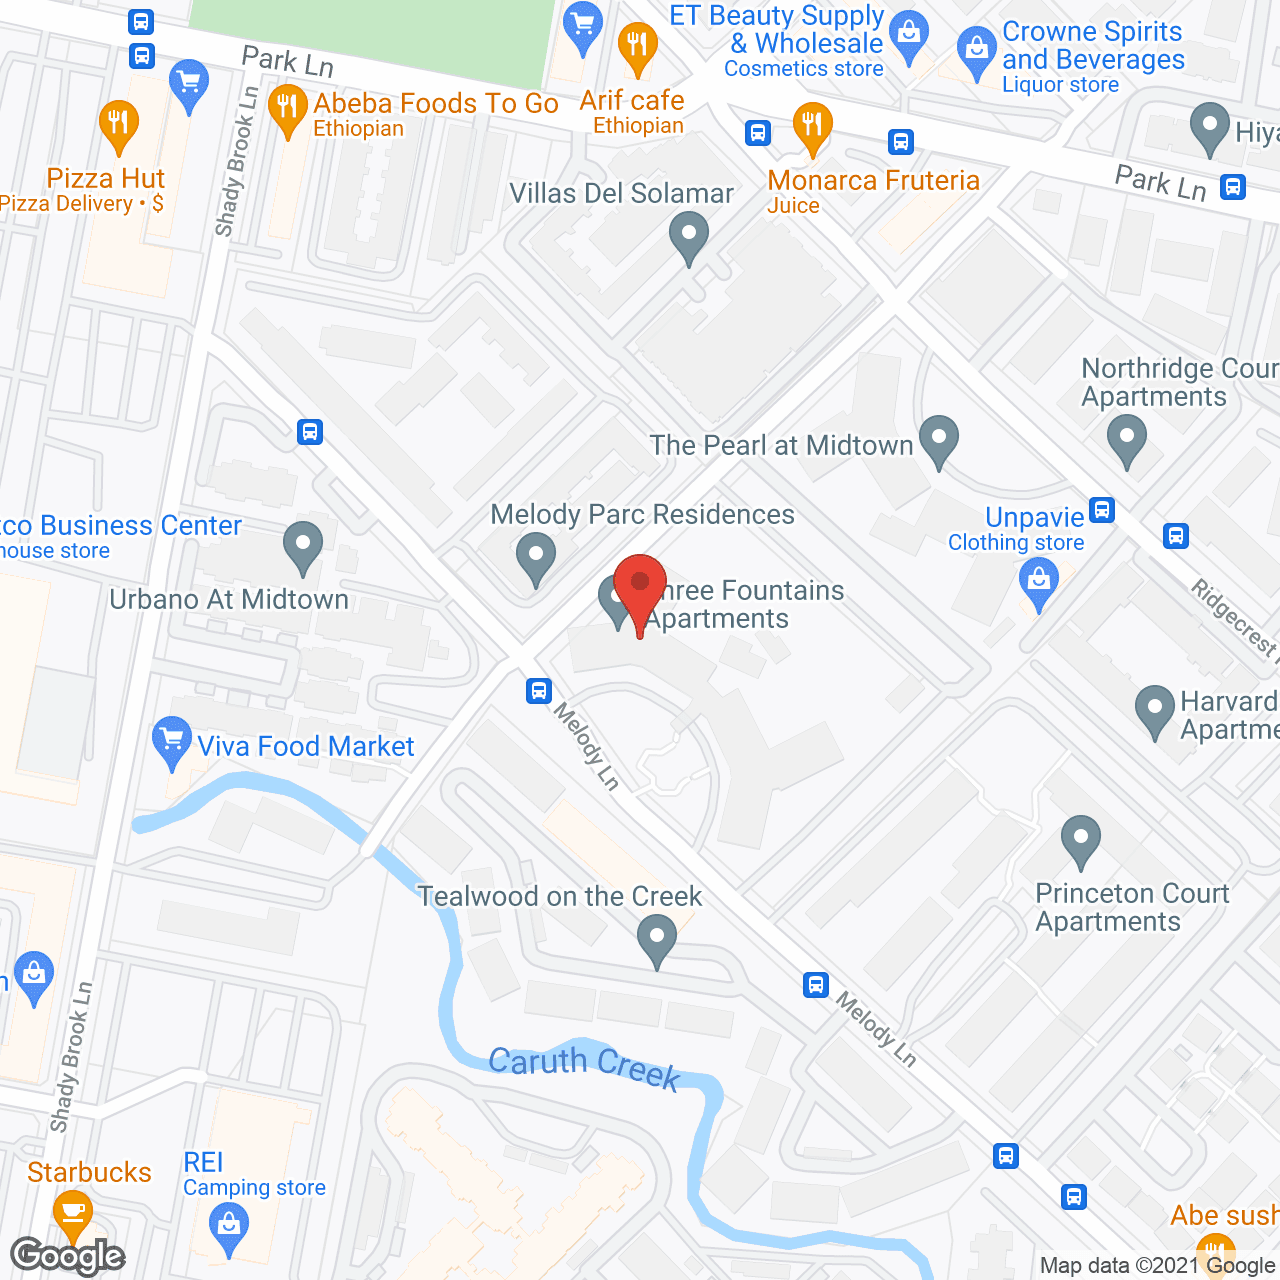 Three Fountains in google map